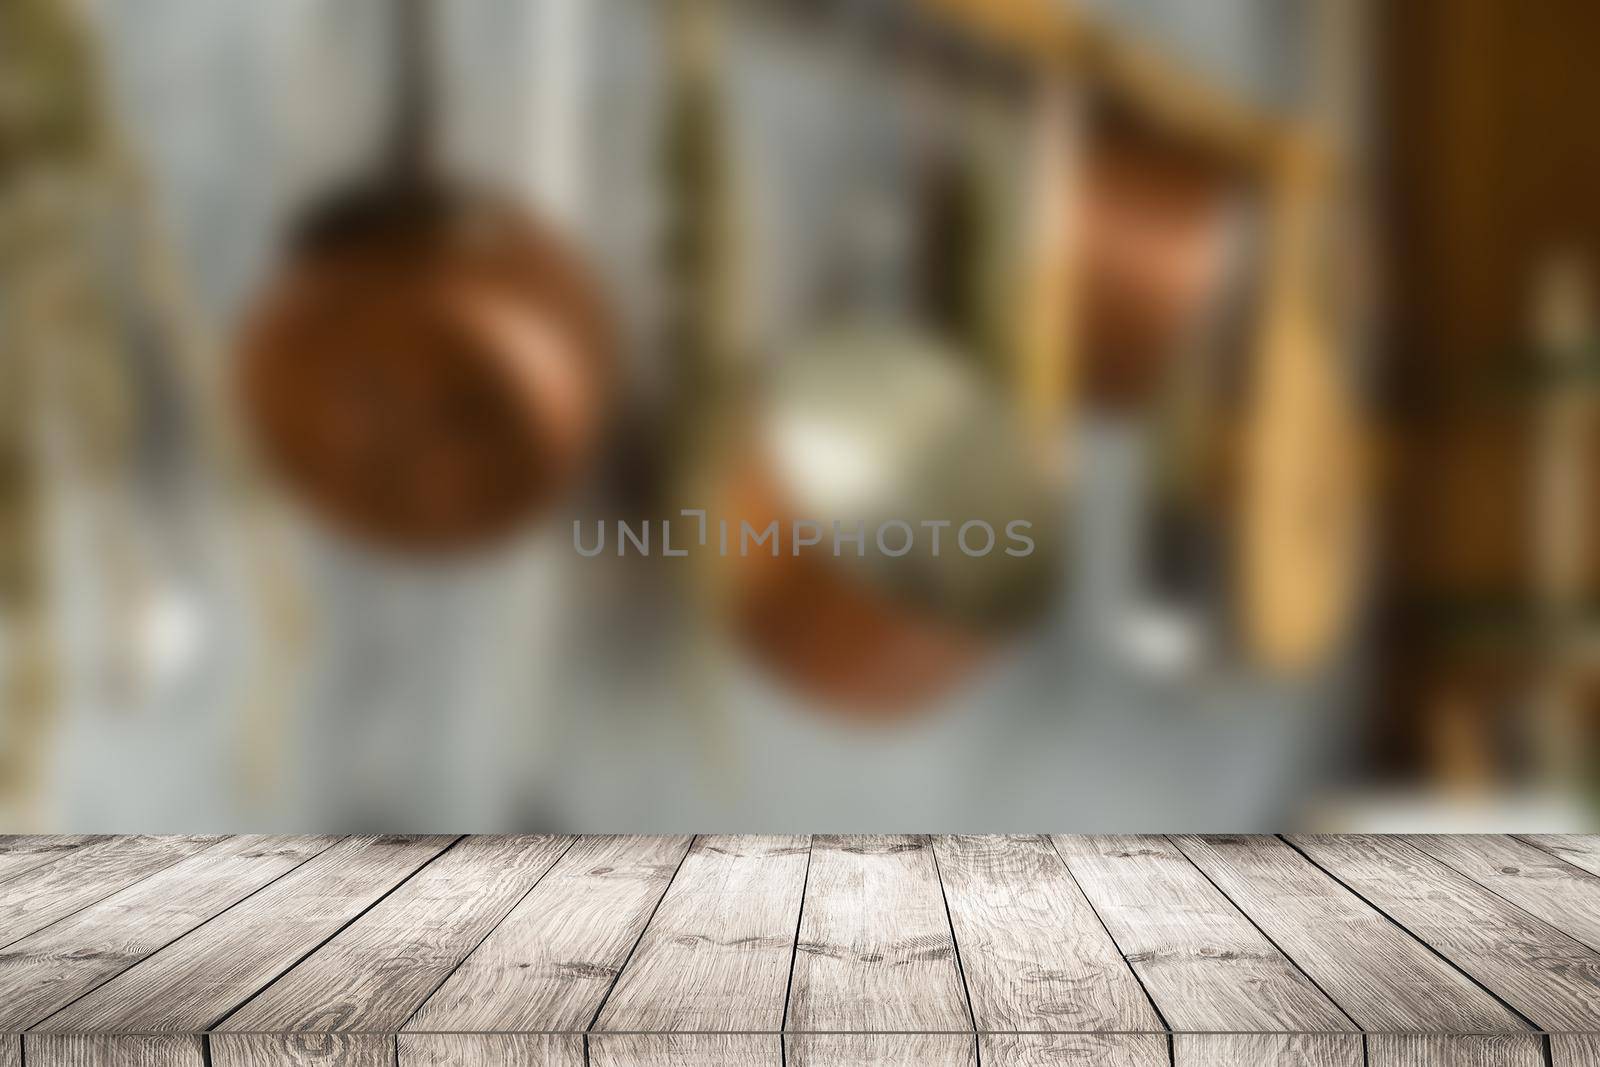 Baking ingredients placed on wooden table, ready for cooking. Copyspace for text. Concept of food preparation, kitchen on background. by Andelov13